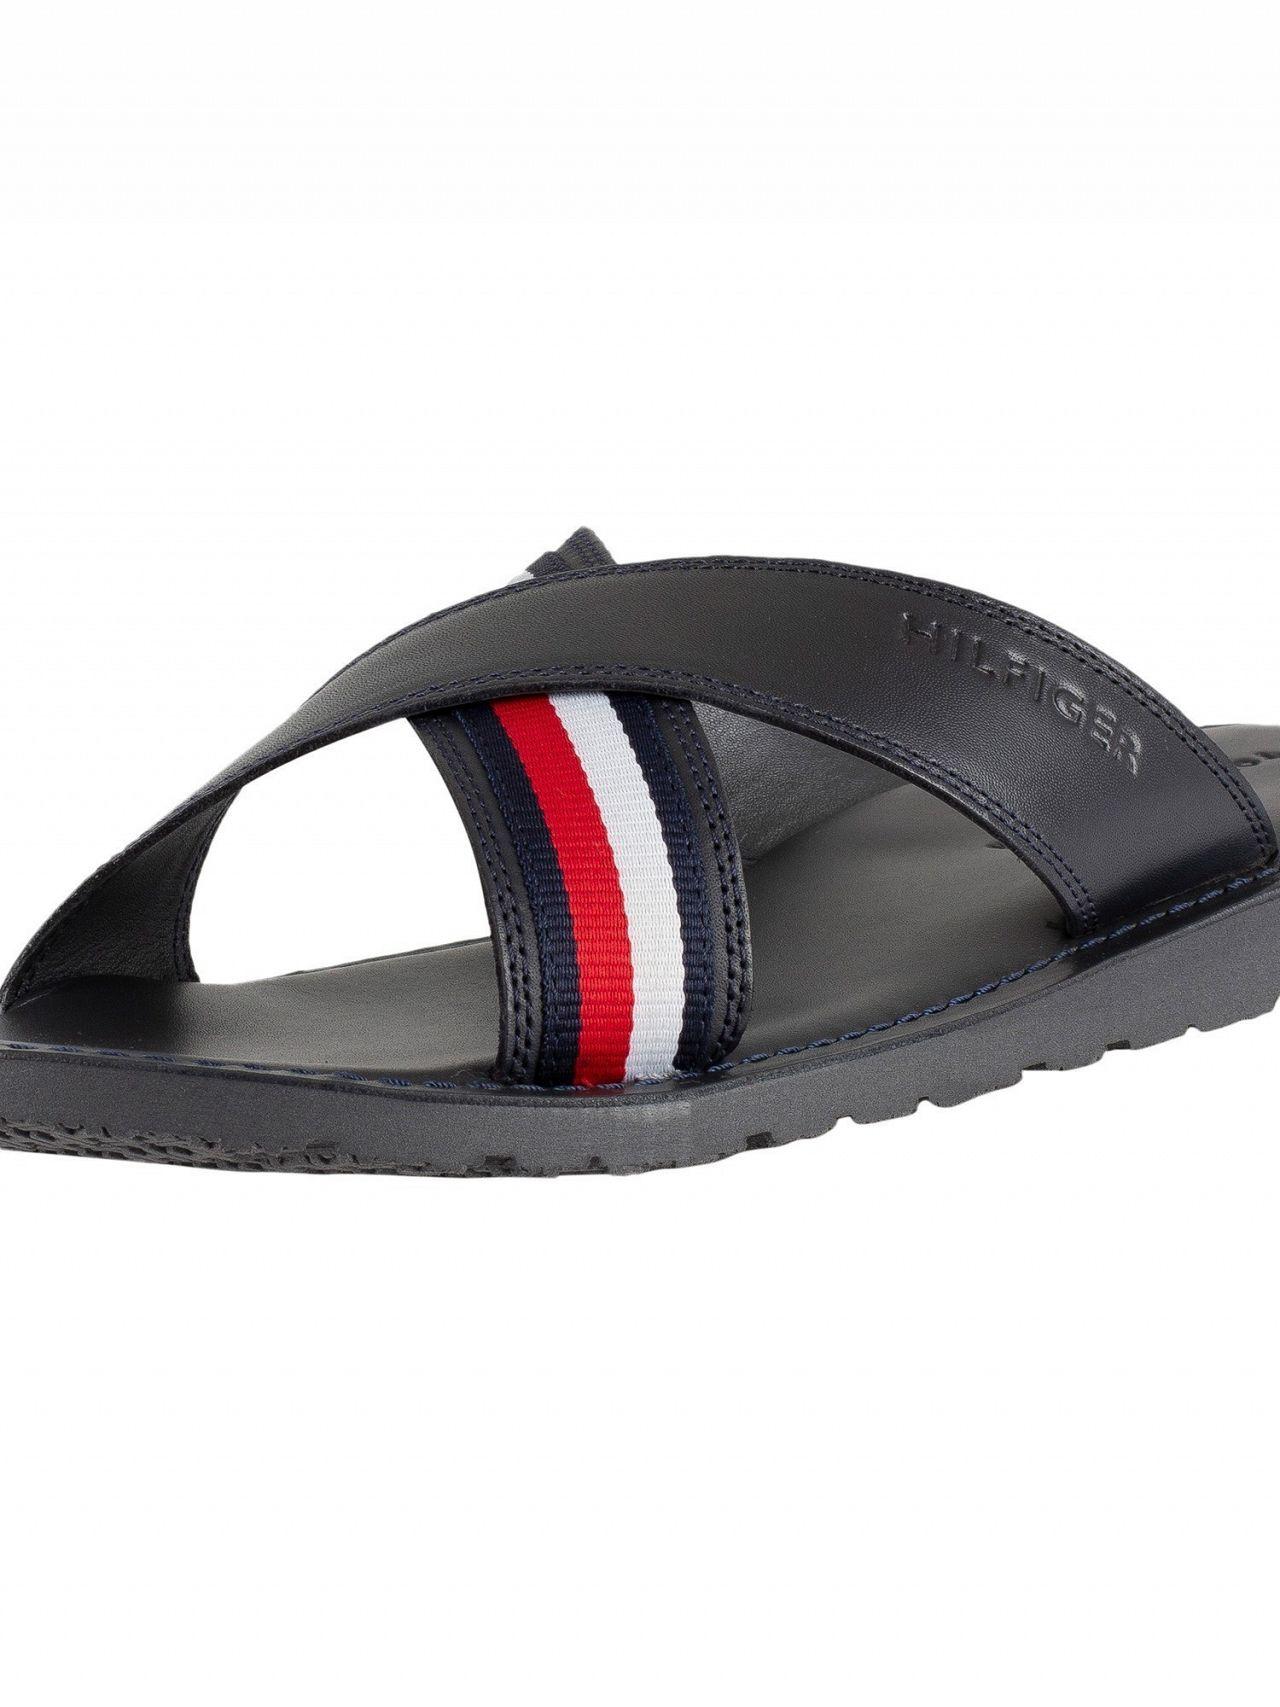 Tommy Hilfiger Midnight Criss Cross Leather Sandals in Blue for Men - Lyst